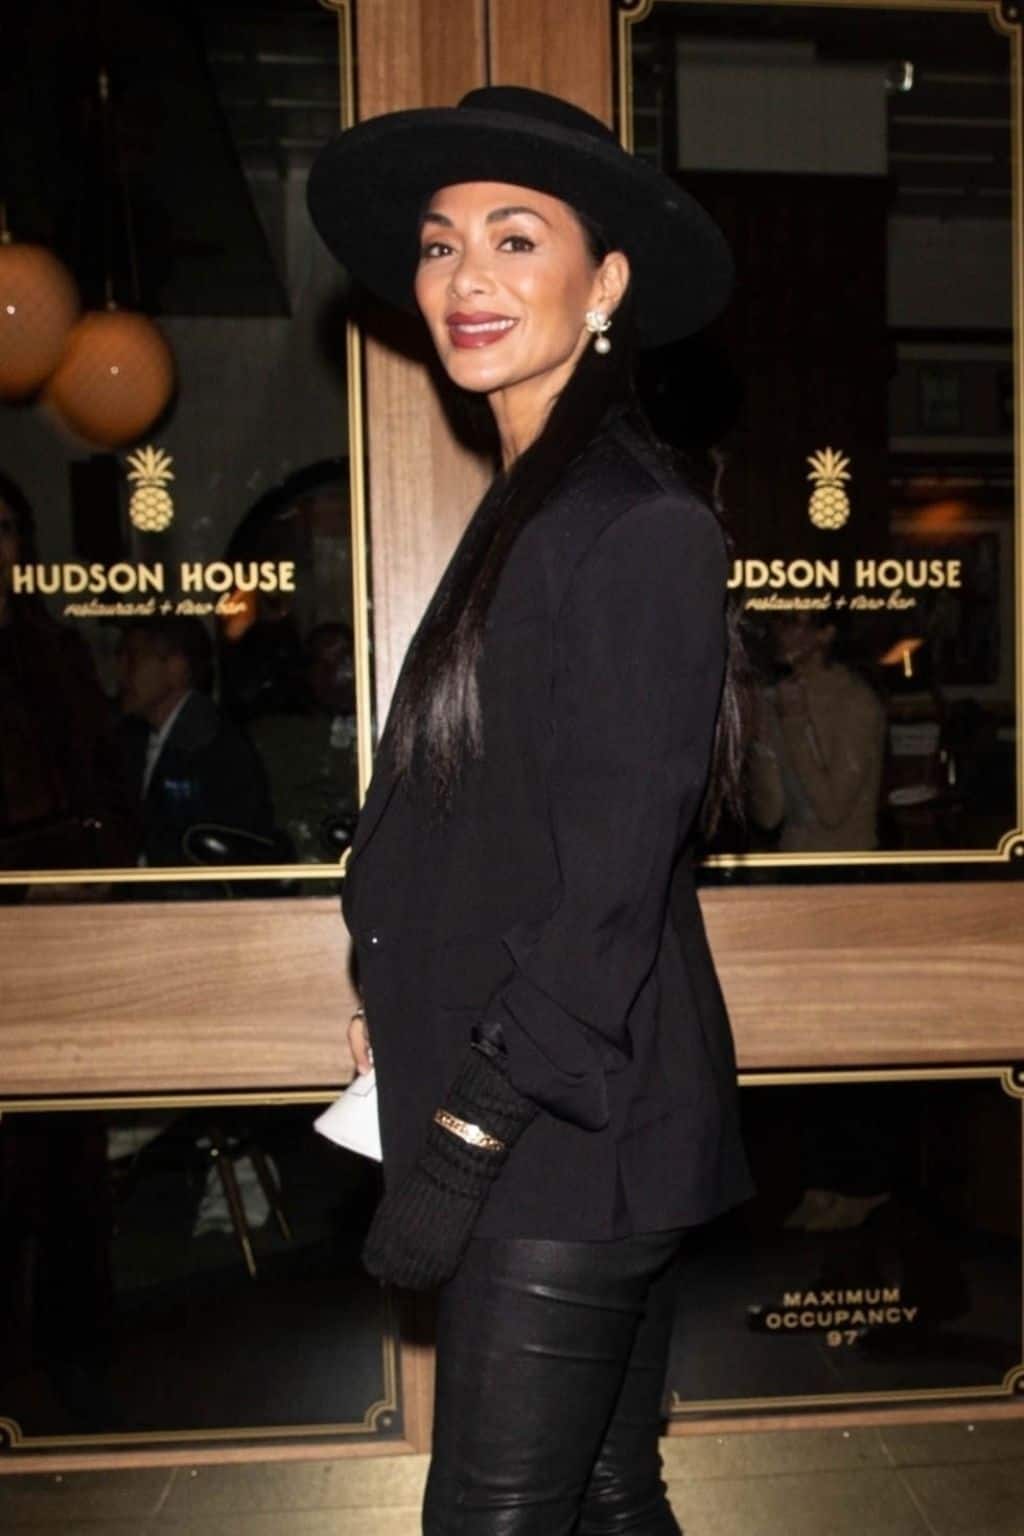 Nicole Scherzinger Rocks Stylish Outfit for Cozy Date with Thom Evans